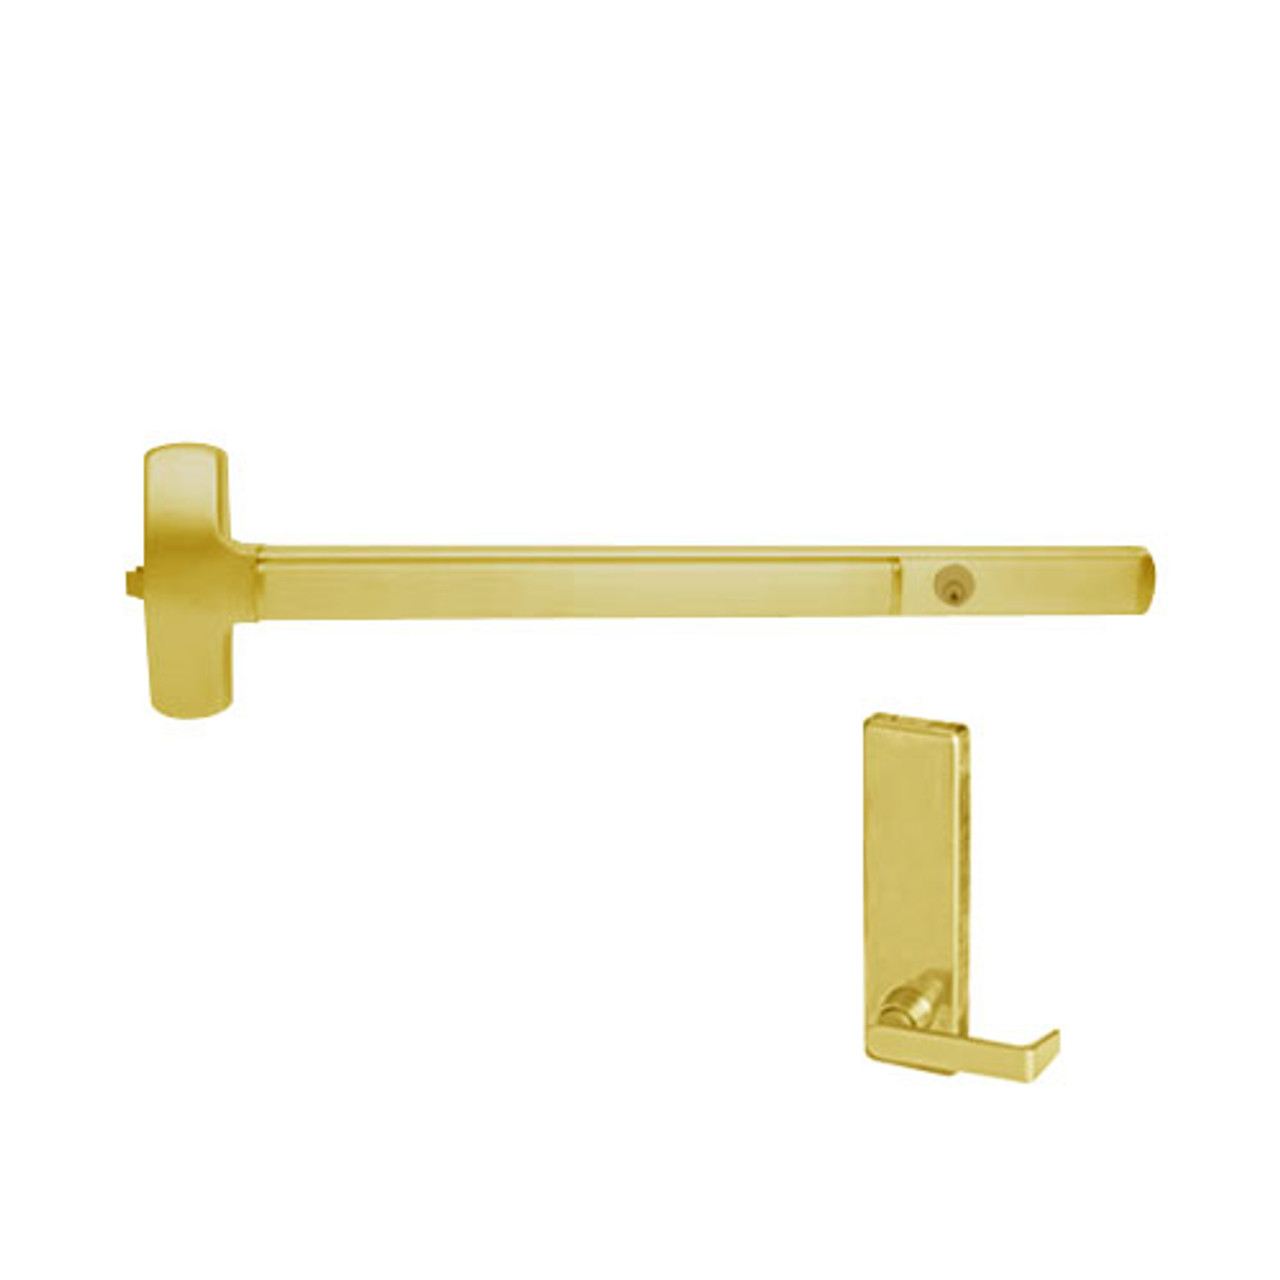 CD25-R-L-DT-DANE-US4-4-LHR Falcon Exit Device in Satin Brass